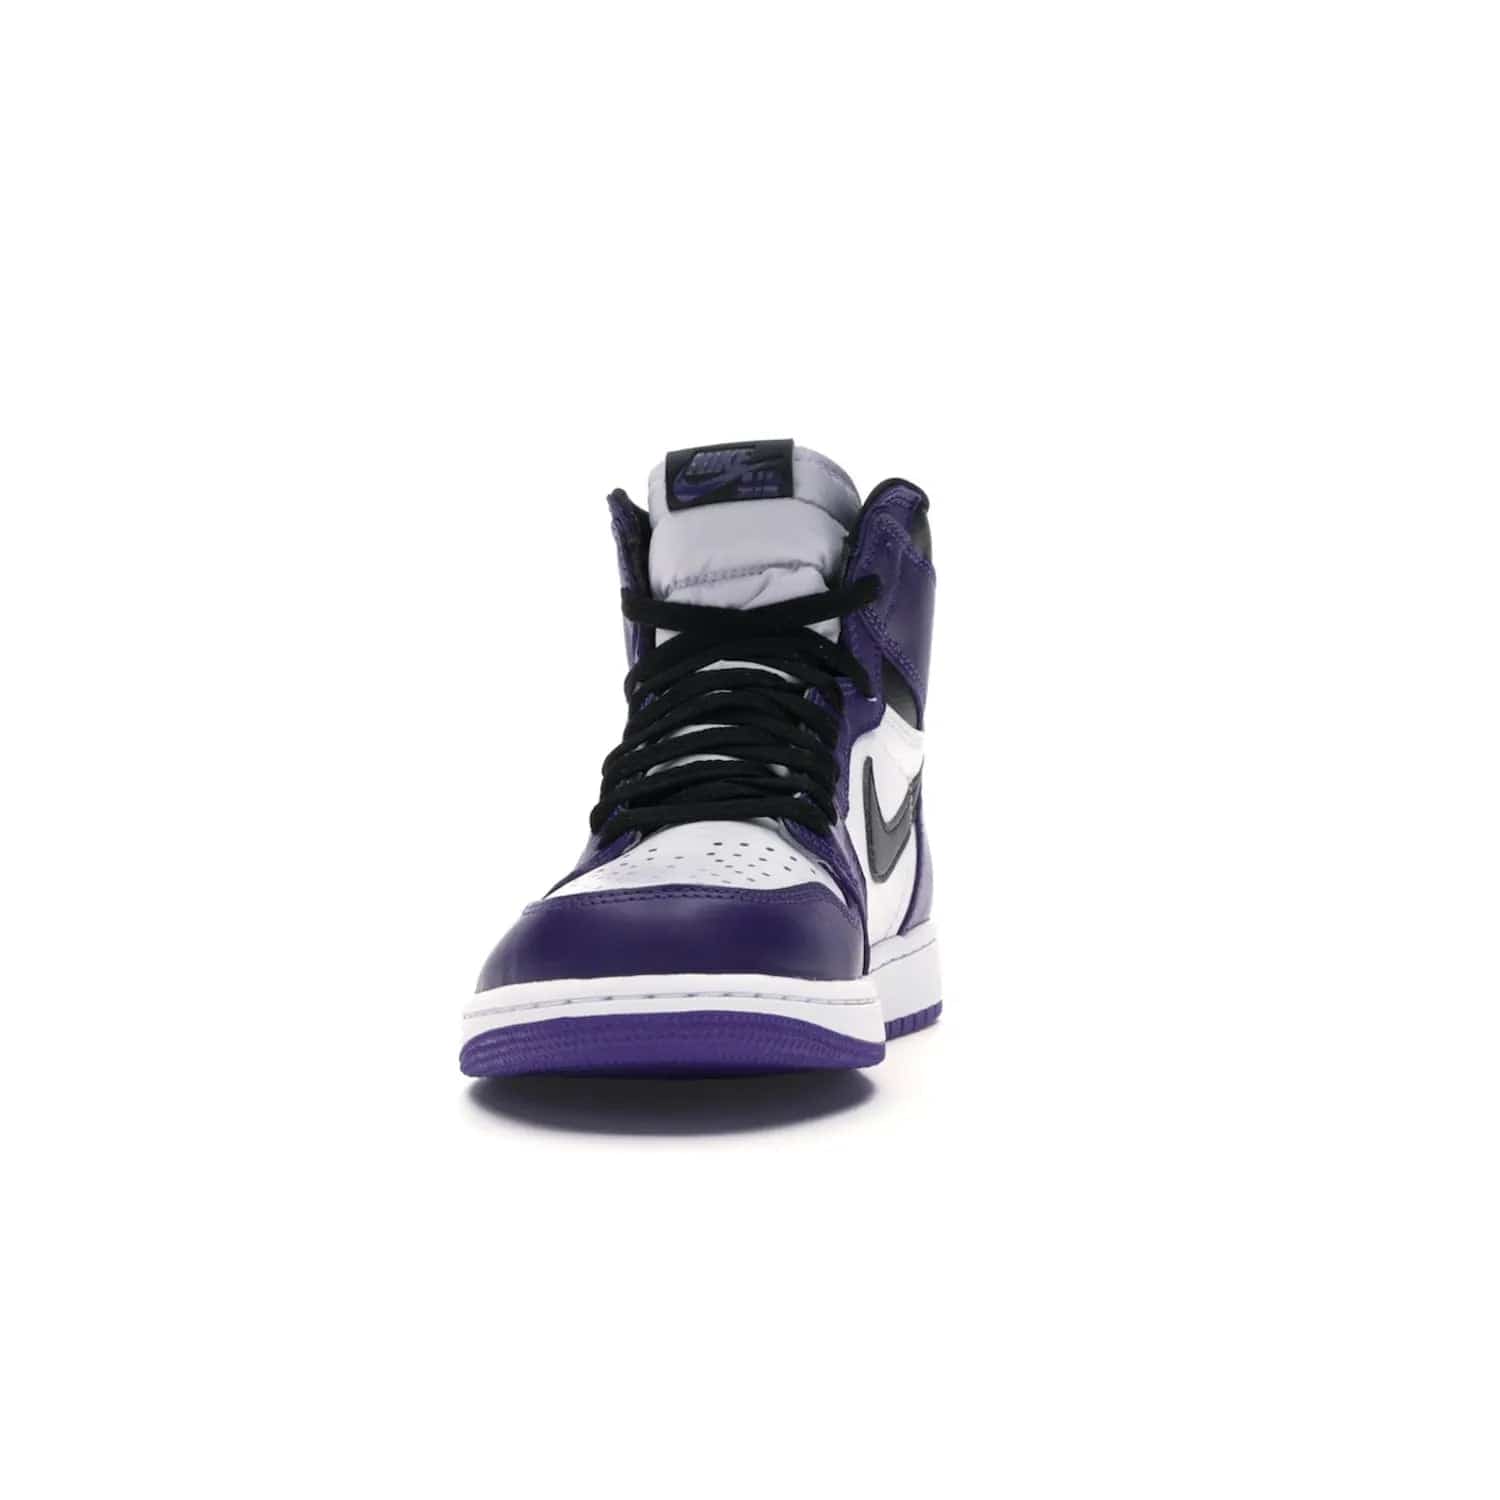 Jordan 1 Retro High Court Purple White - Image 11 - Only at www.BallersClubKickz.com - Grab the classic Jordan 1 Retro High Court Purple White and add major flavor to your collection. White leather upper with Court Purple overlays and Swoosh logo. White midsole and purple outsole. Get yours and rep your Jordan Brand.